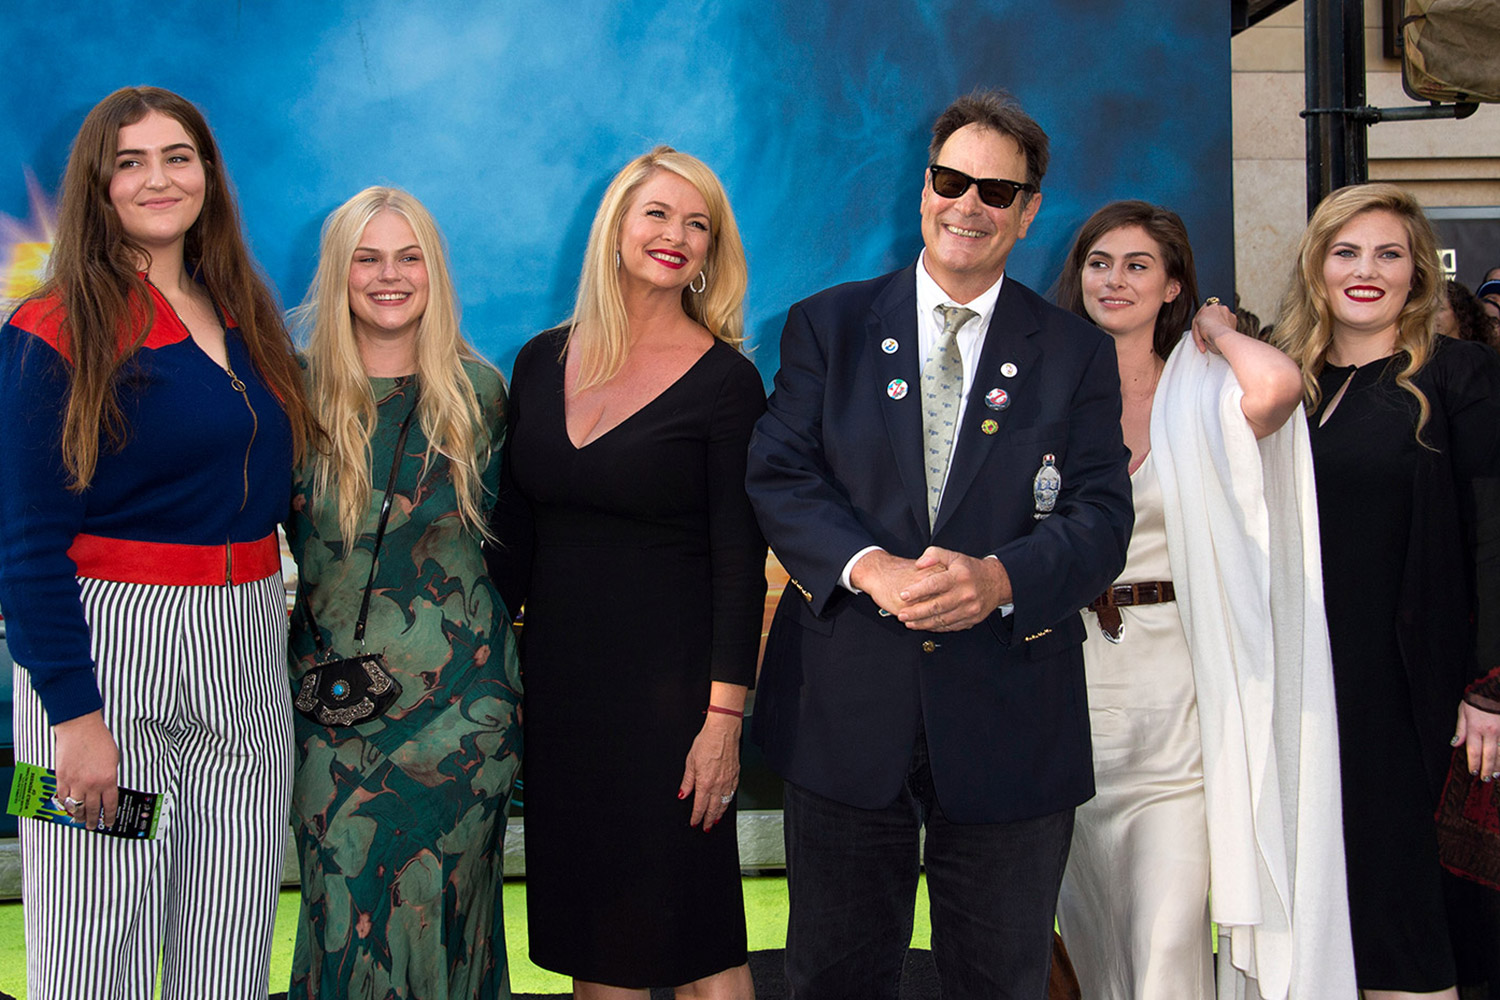 Dan Aykroyd and Donna Dixon Separate After 39 Years, Remain Legally Married: 'Loving Friendship'